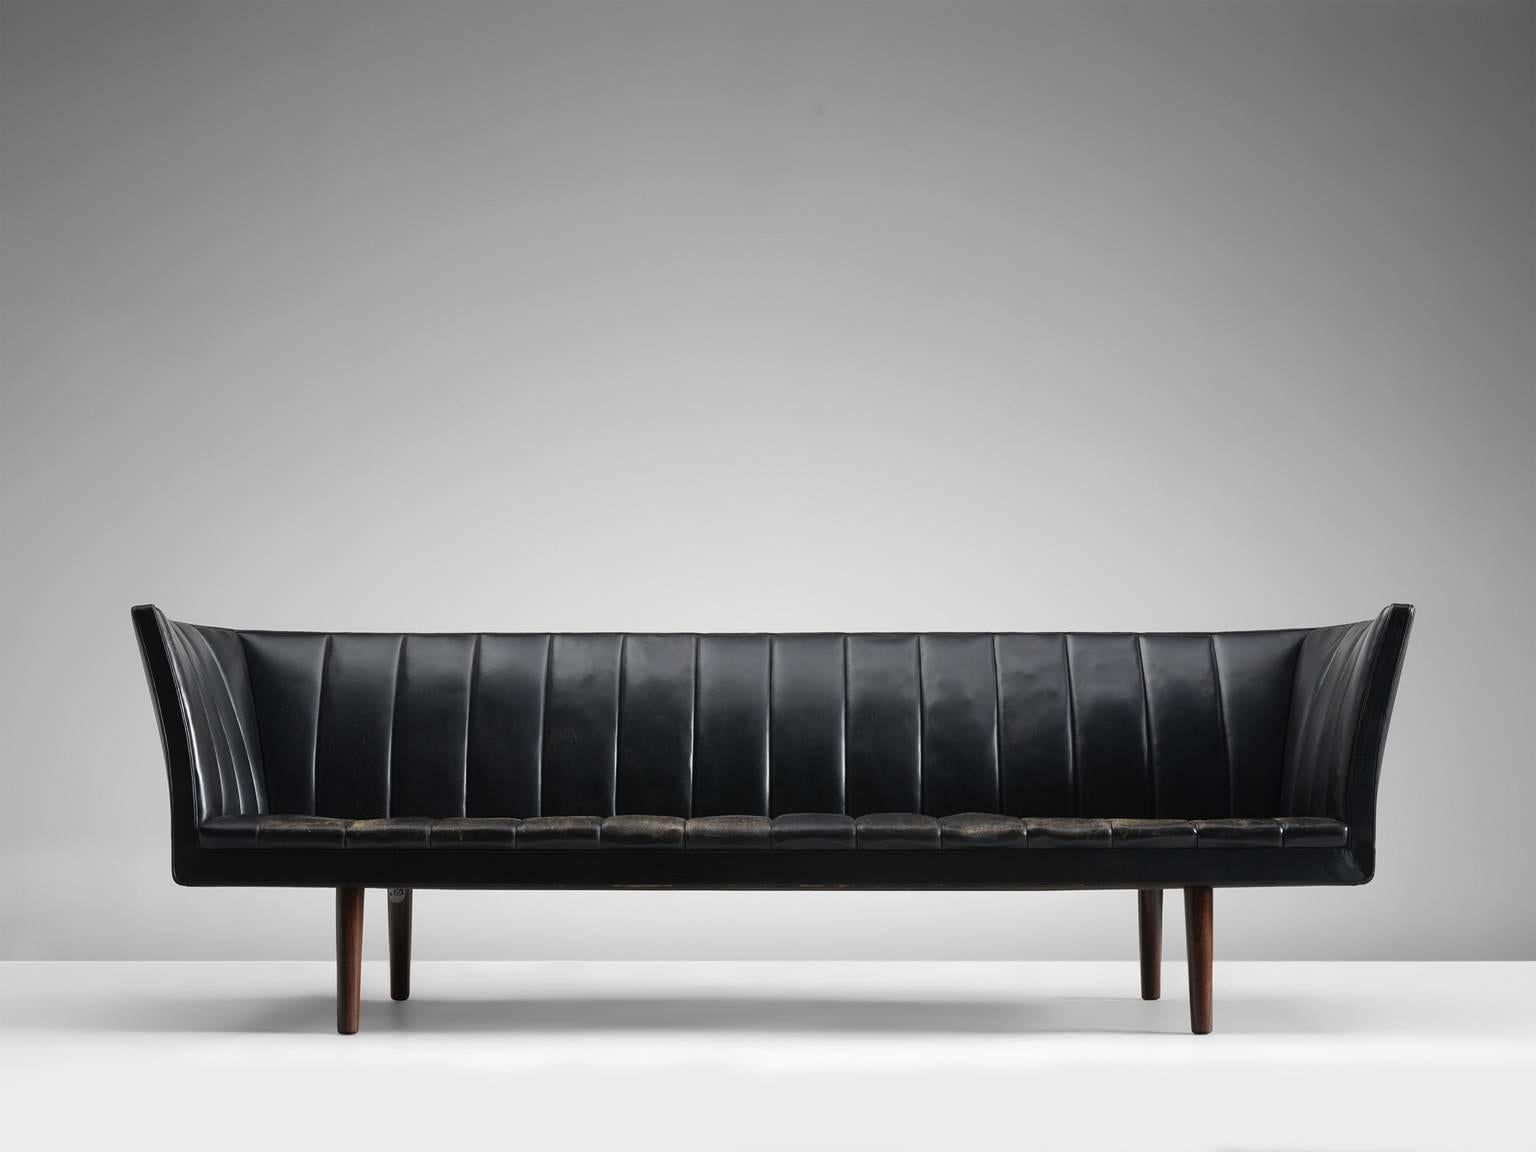 Sofa model V60, in leather and wood, by Helge Vestergaard Jensen for Peder Pederson, Denmark 1960. 

Rare three-seat sofa in black leather. High on its tapered dark wooden legs, this sofa is a beautiful sight to behold. Upholstered in black leather